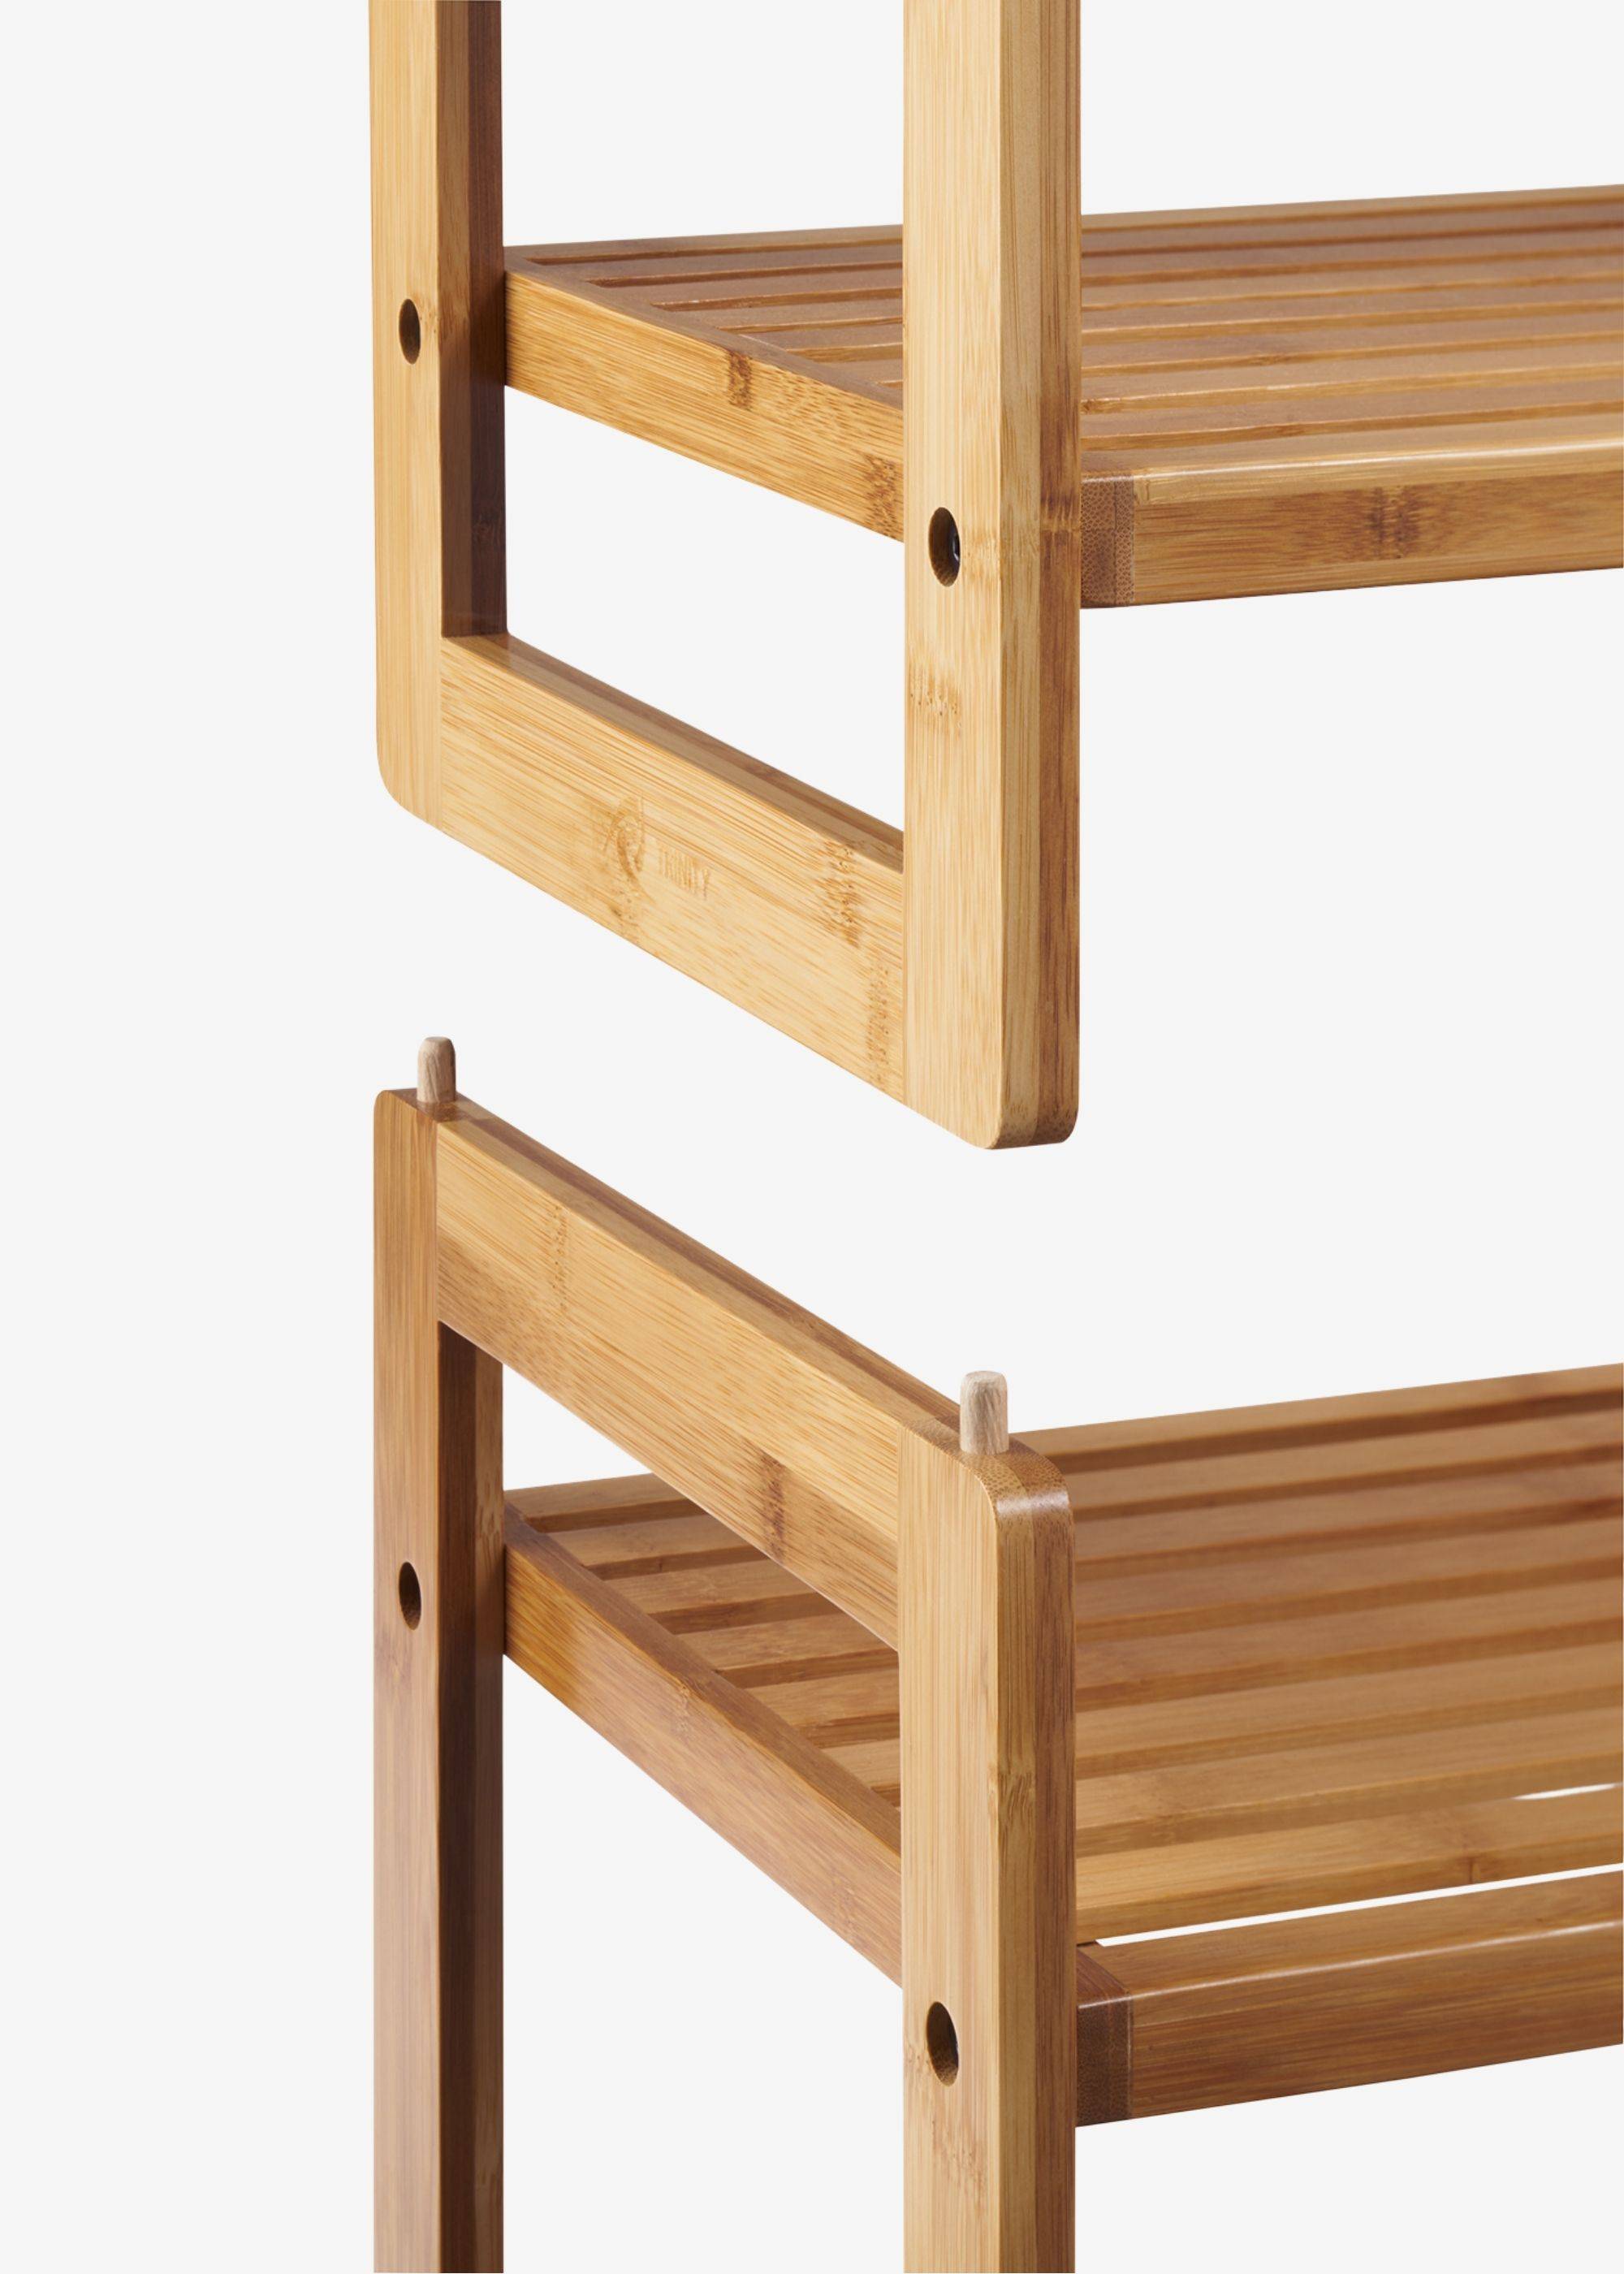 wooden pegs that connect two shoe rack together